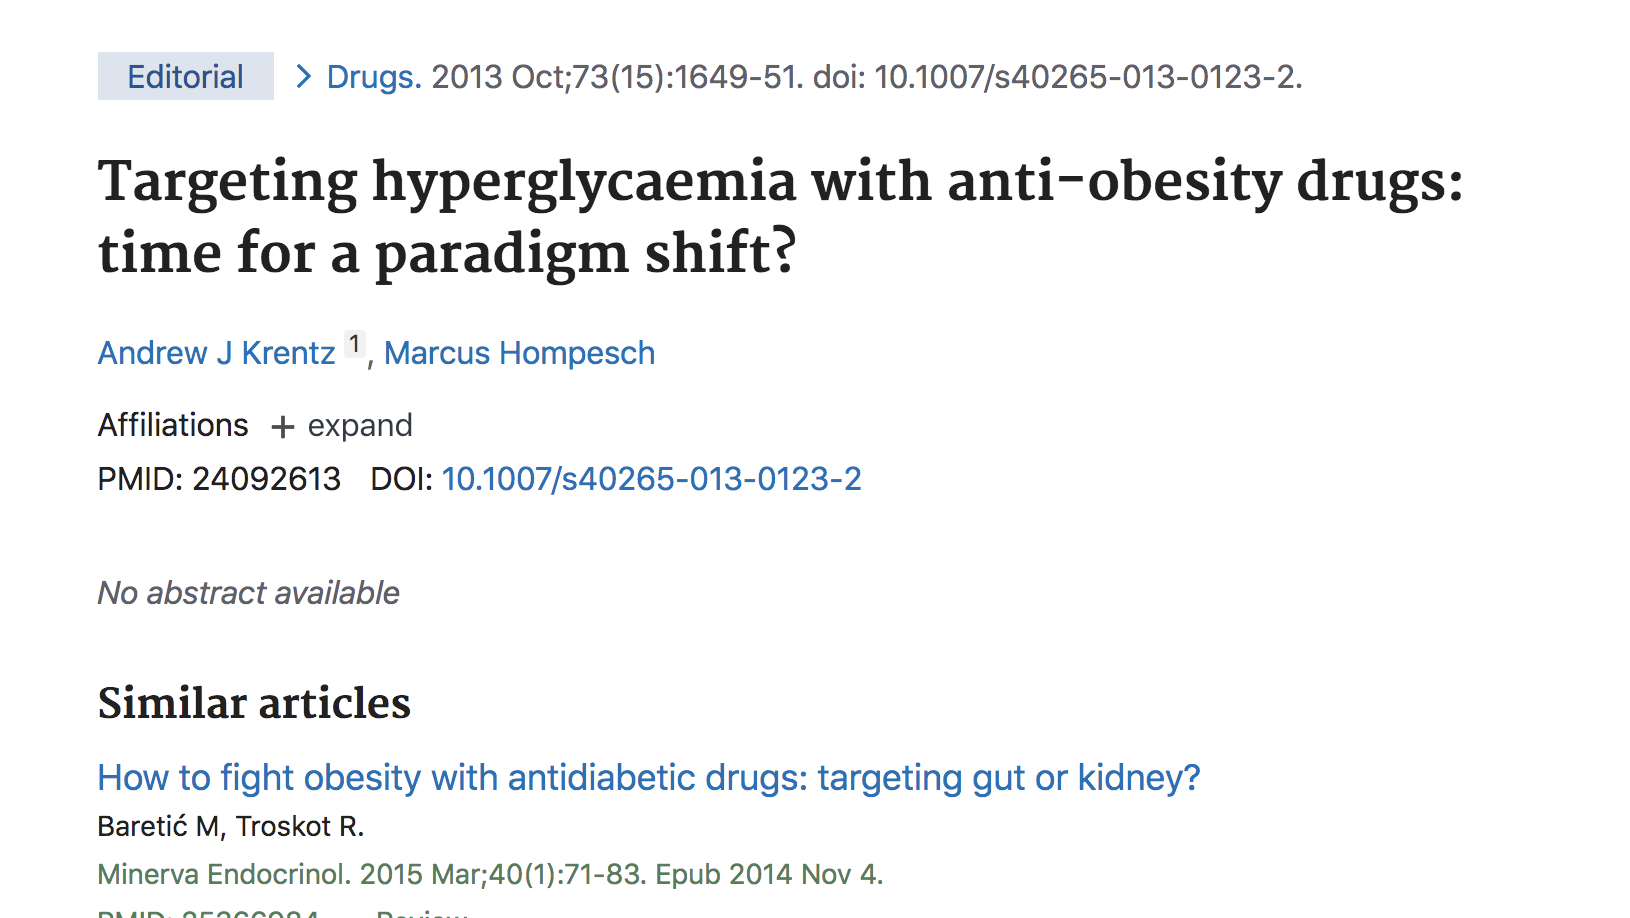 image of Targeting hyperglycaemia with anti-obesity drugs: time for a paradigm shift.